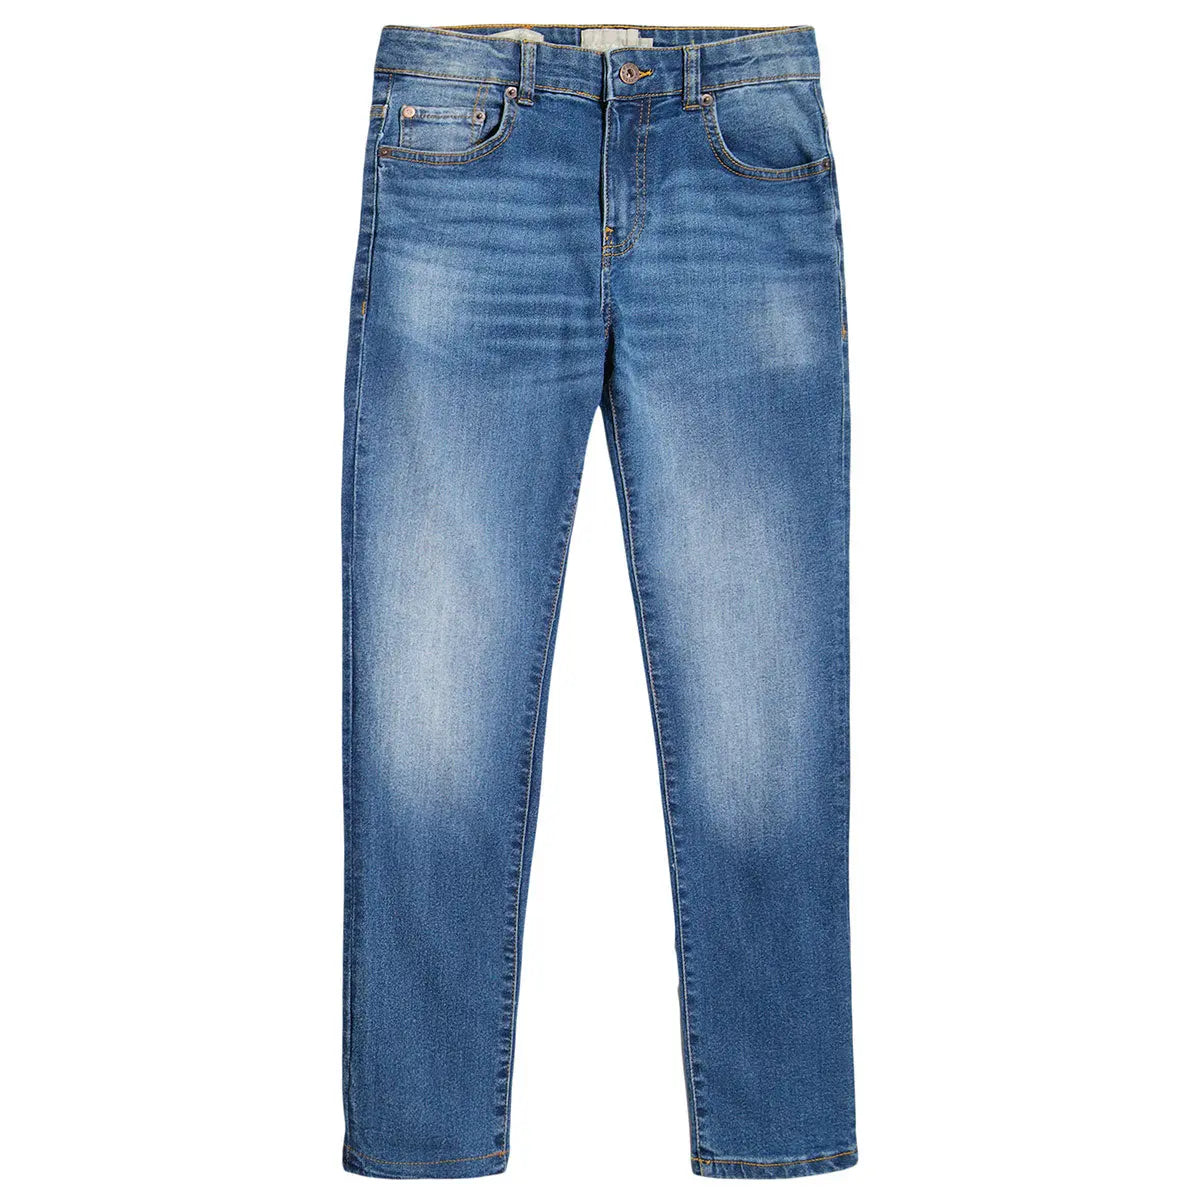 Image of Lucky Brand Boy's Lucky Authentic Skinny Denim Pant